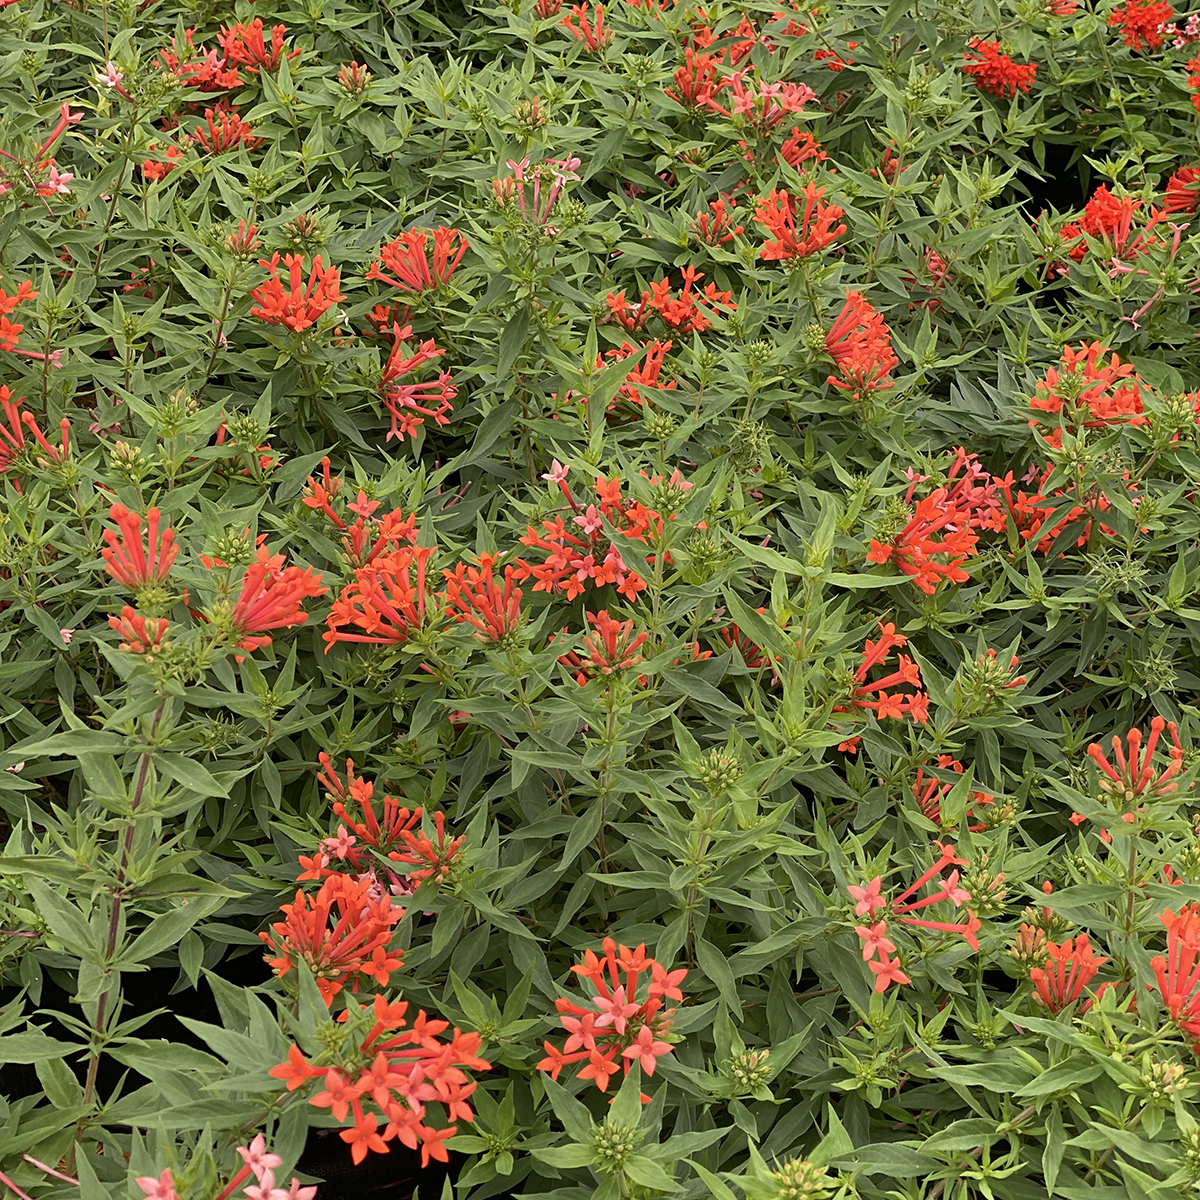 Estrellita Little Star firecracker bush is more compact and more colorful than conventional varieties. 